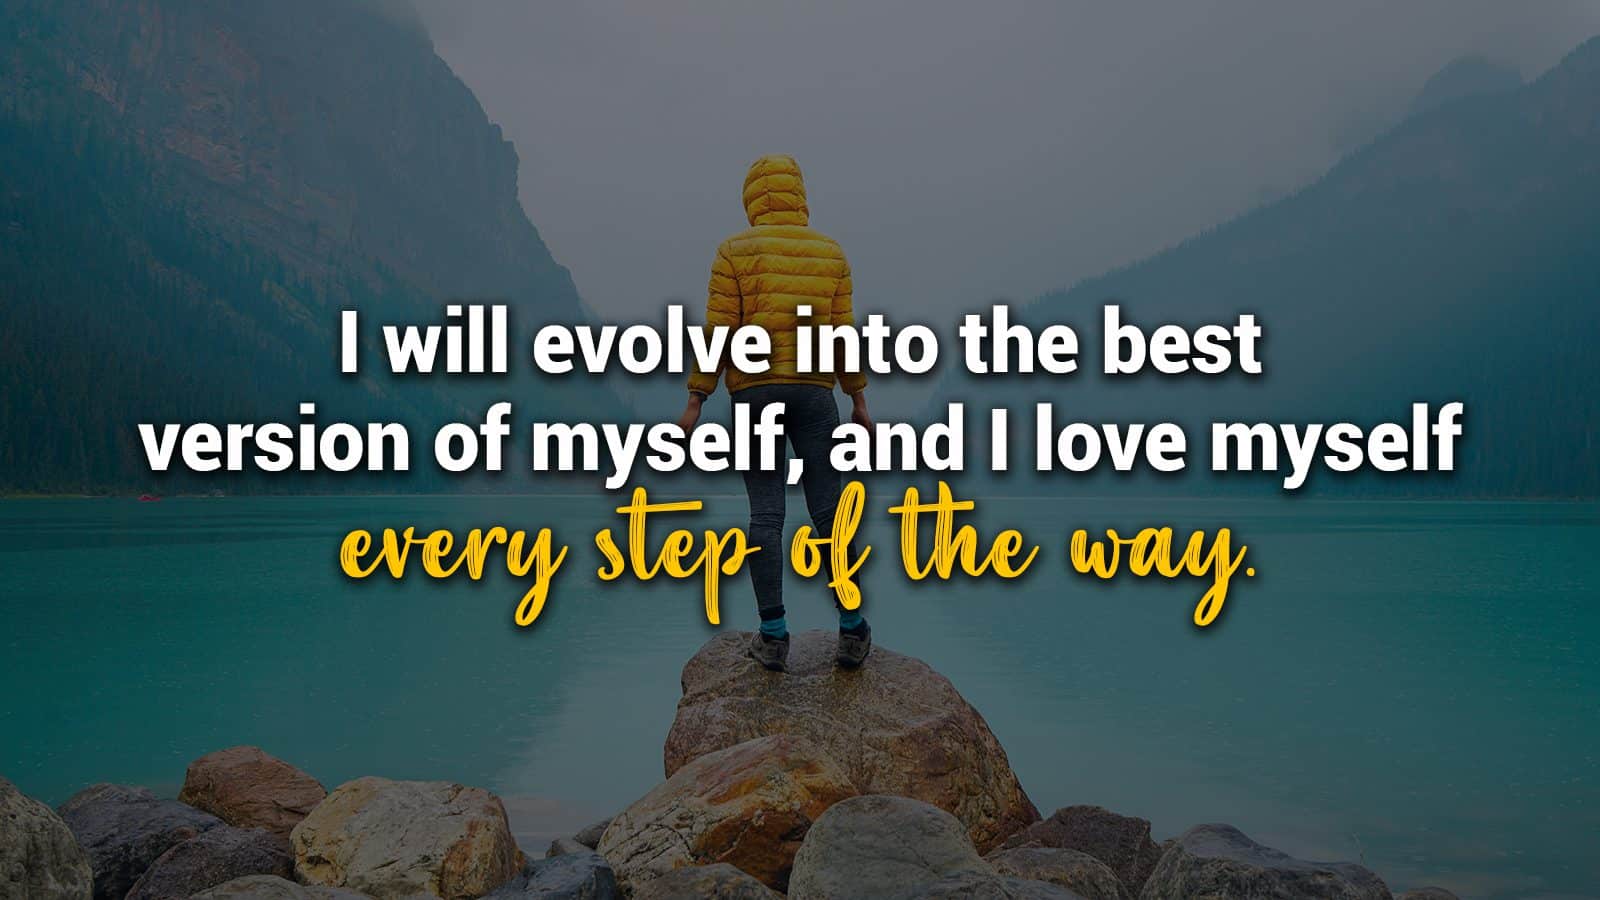 20 Daily Affirmations to Remind You to Love Yourself